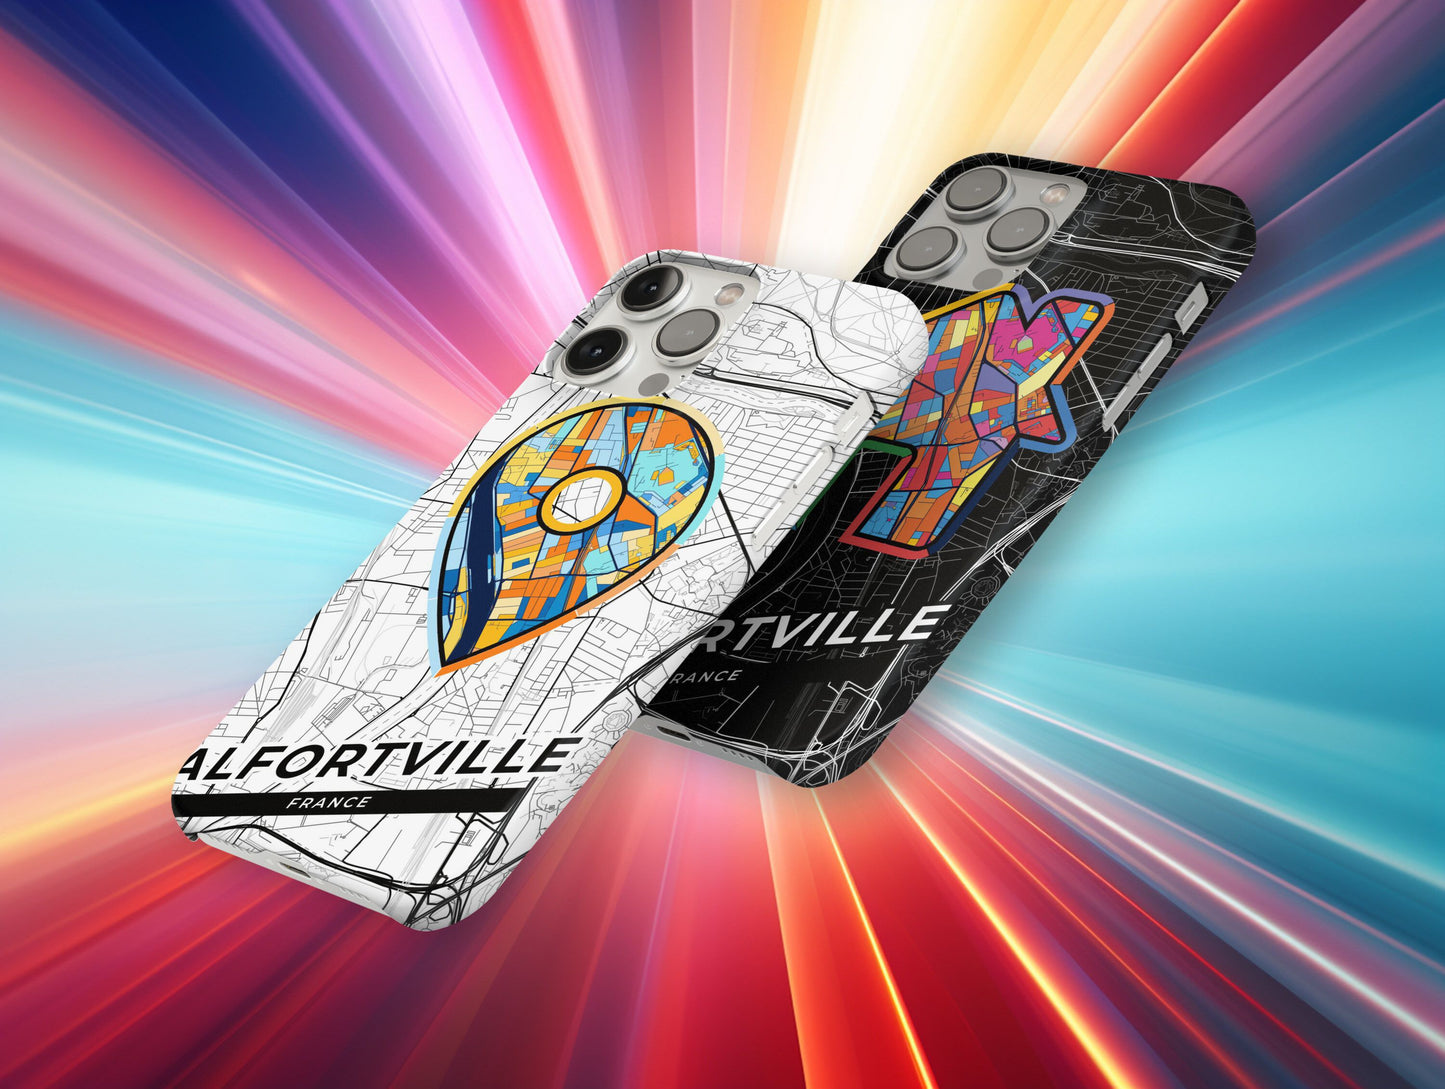 Alfortville France slim phone case with colorful icon. Birthday, wedding or housewarming gift. Couple match cases.